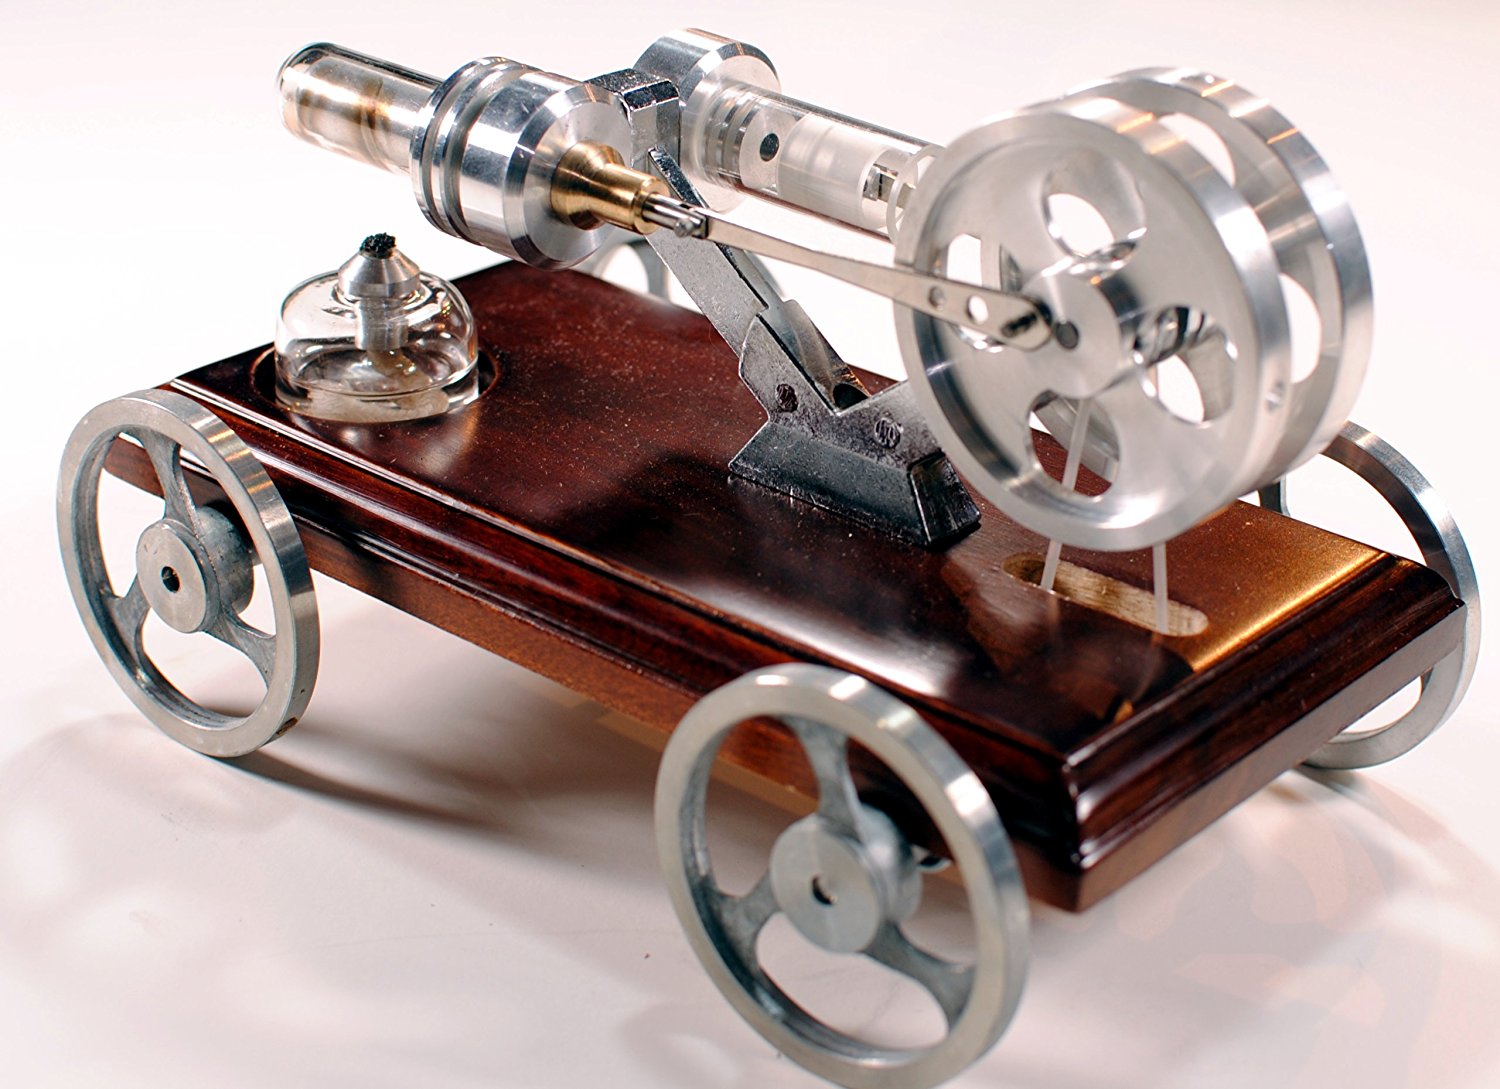 Where to buy Stirling engines plus two surprising safety tips.